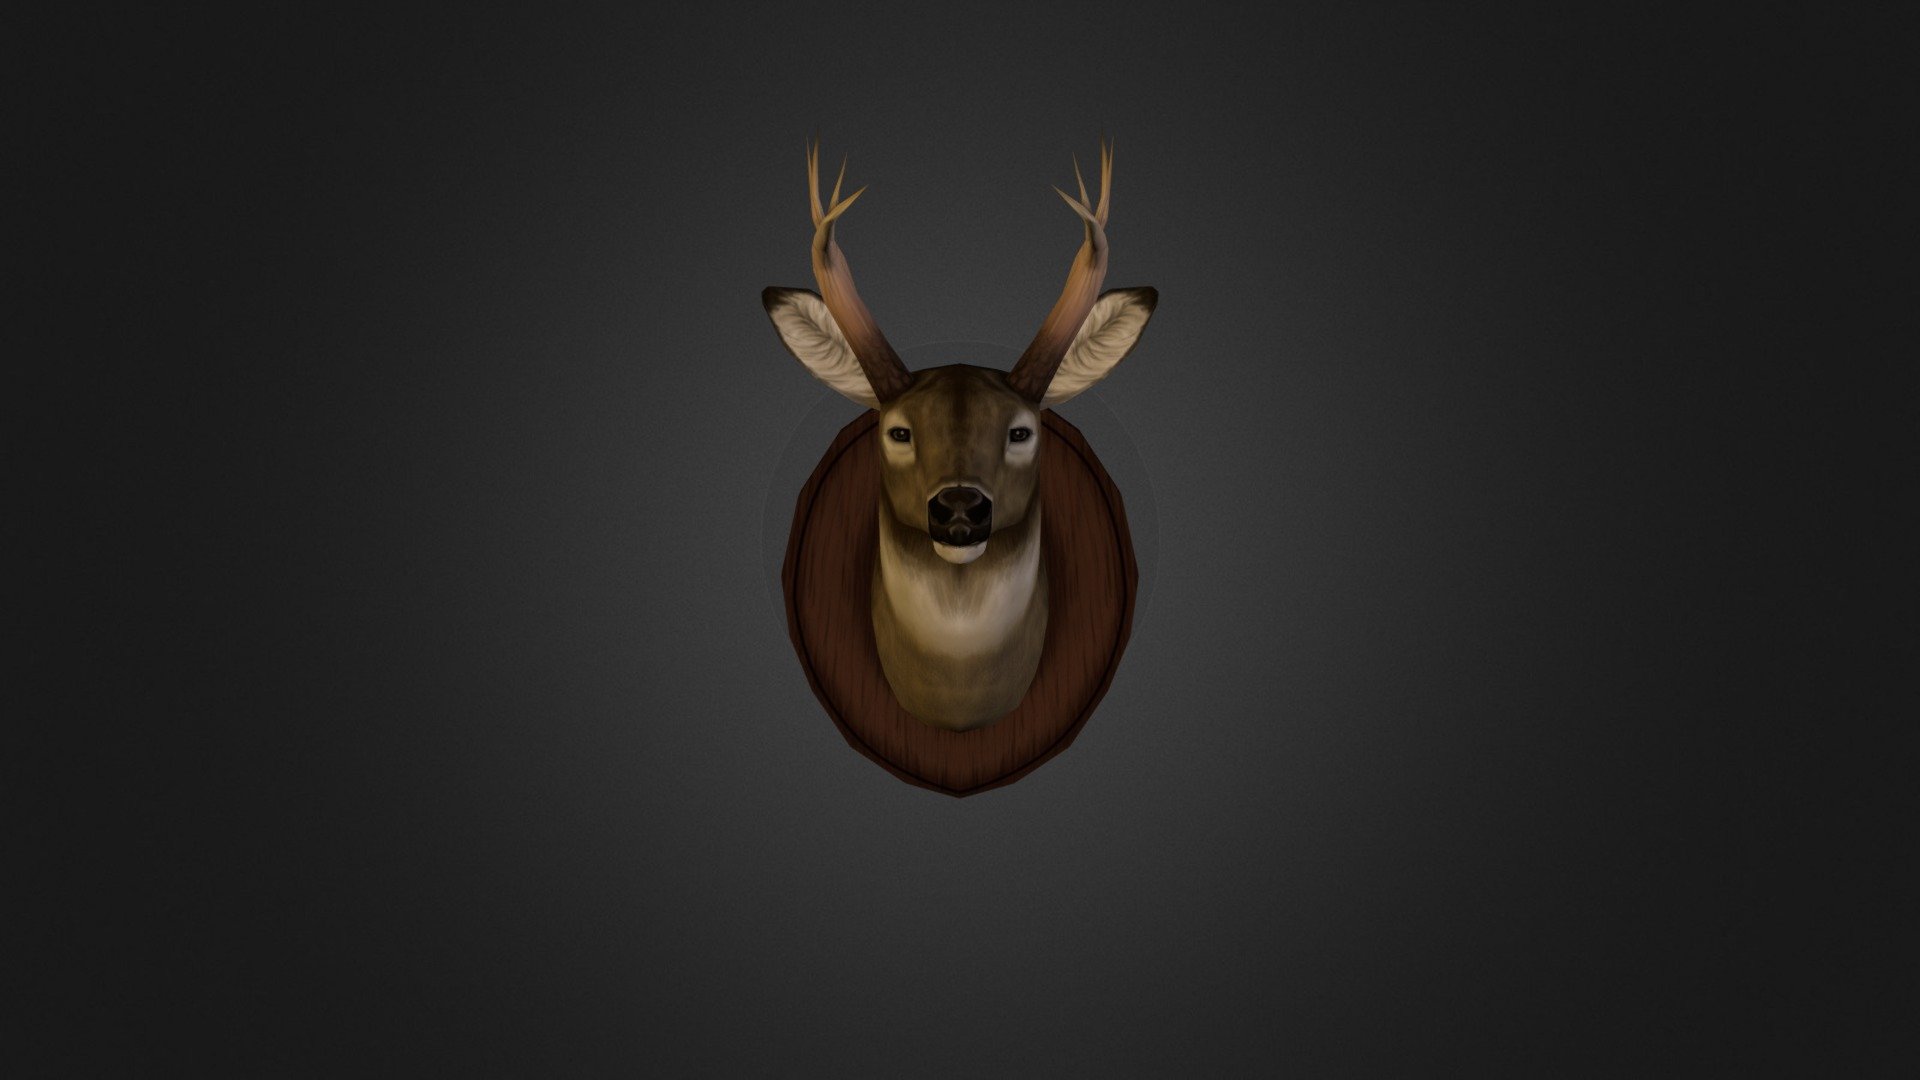 Low poly deer head trophy. Created for an interior environment 3d model